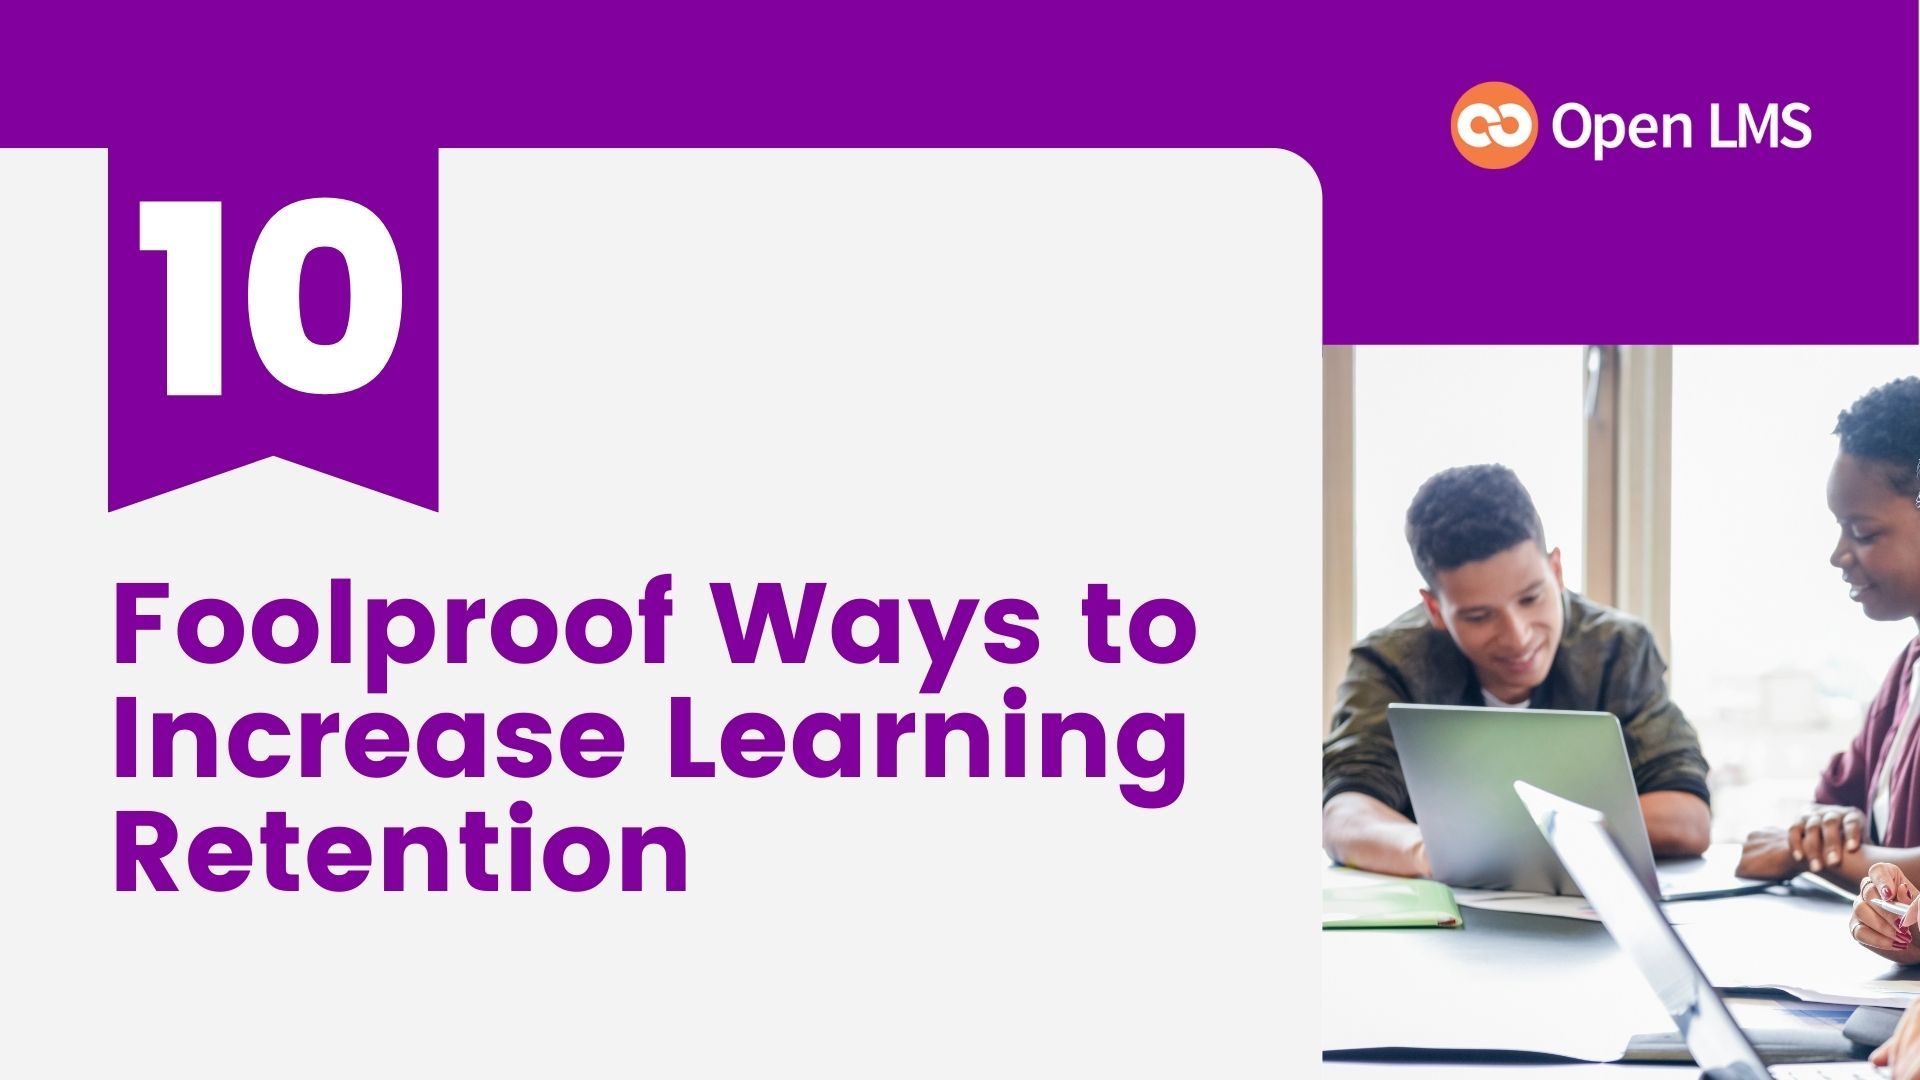 10 Foolproof Ways to Increase Learning Retention